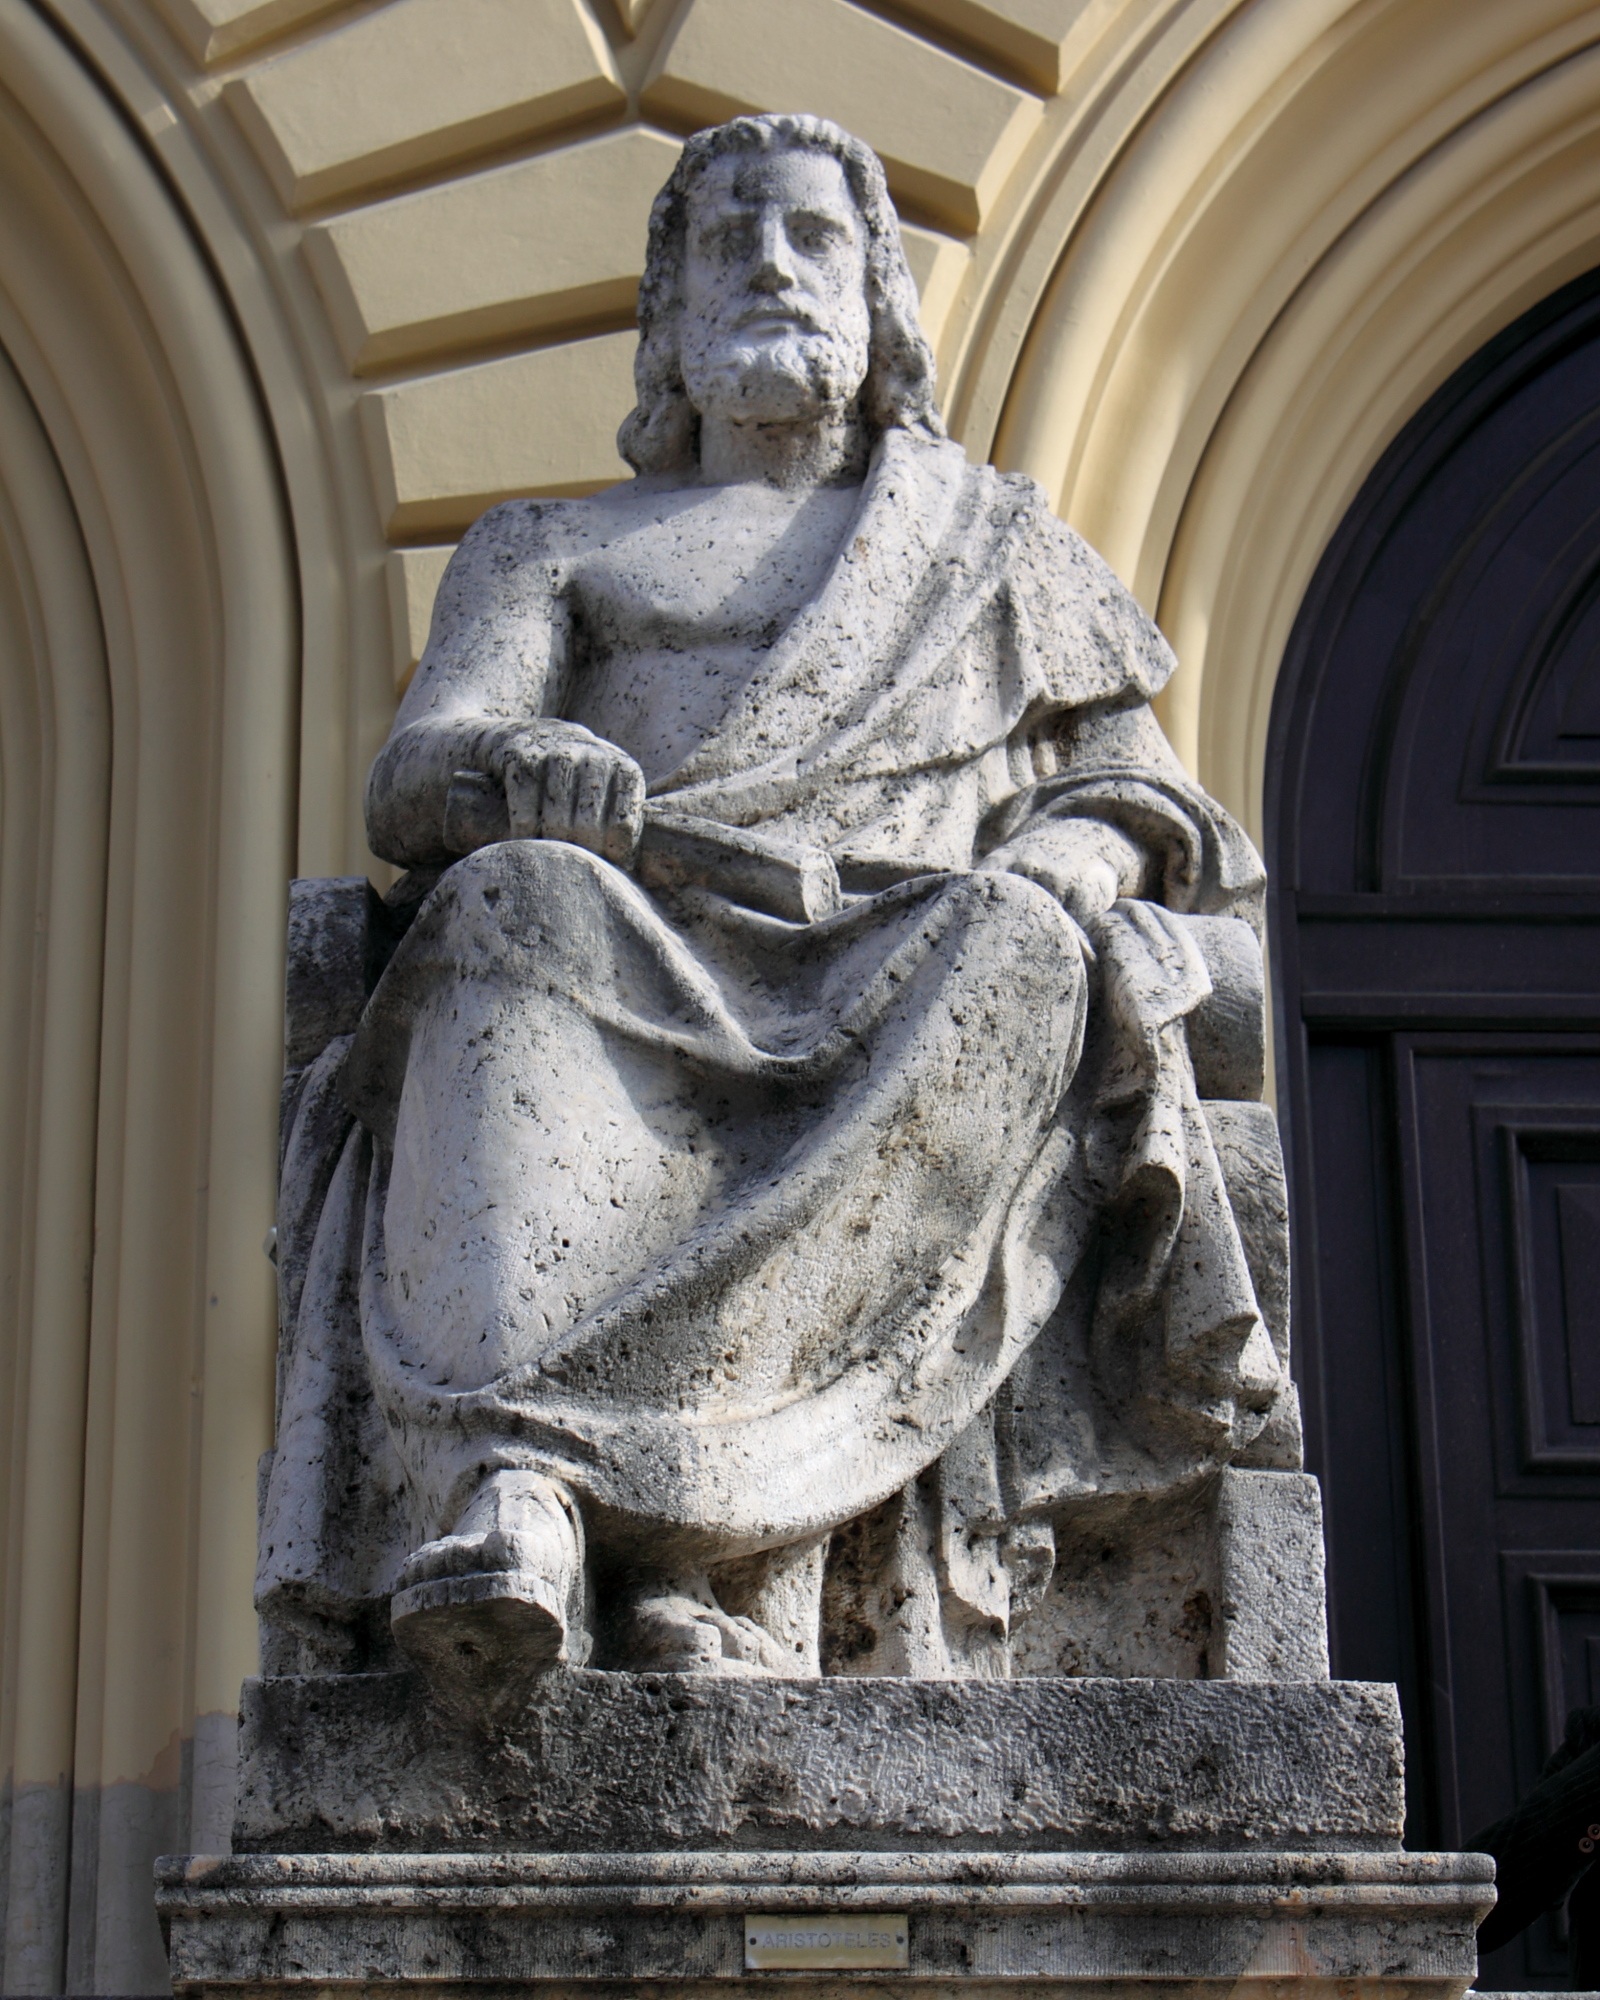 Aristotle, Aristotle was a bugger for the bottle. Statue at the entrance of the Bayerische Staatsbibliothek